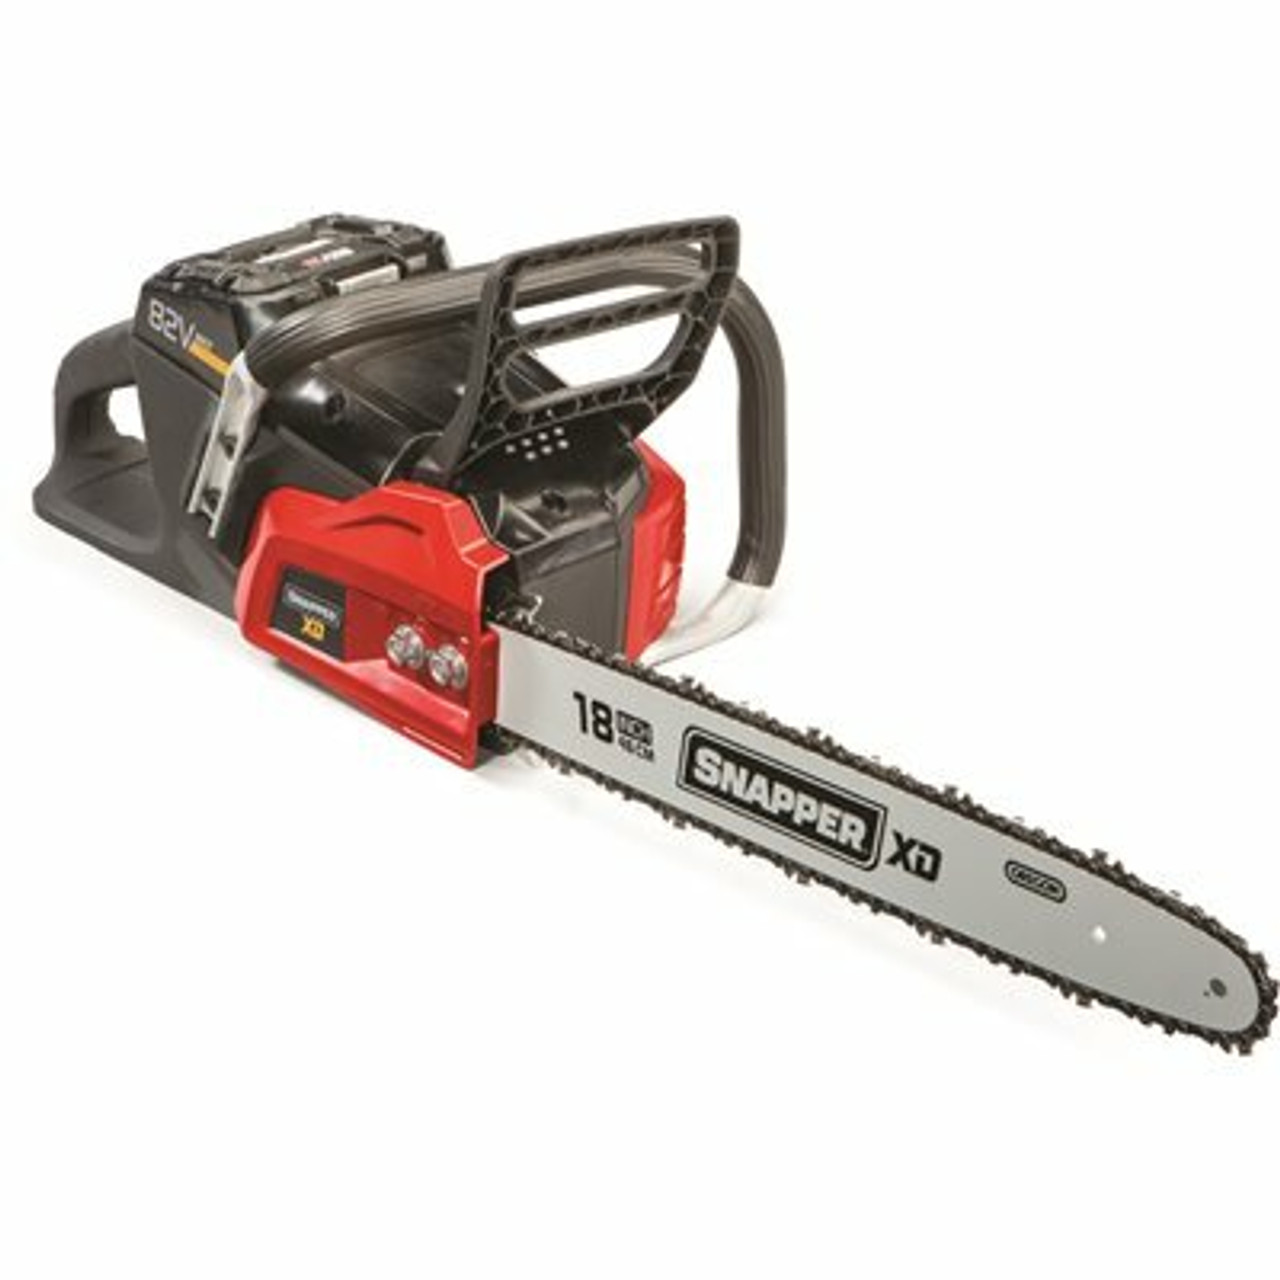 Snapper Xd 18 In. 82-Volt Max Electric Cordless Chainsaw, Battery And Charger Not Included